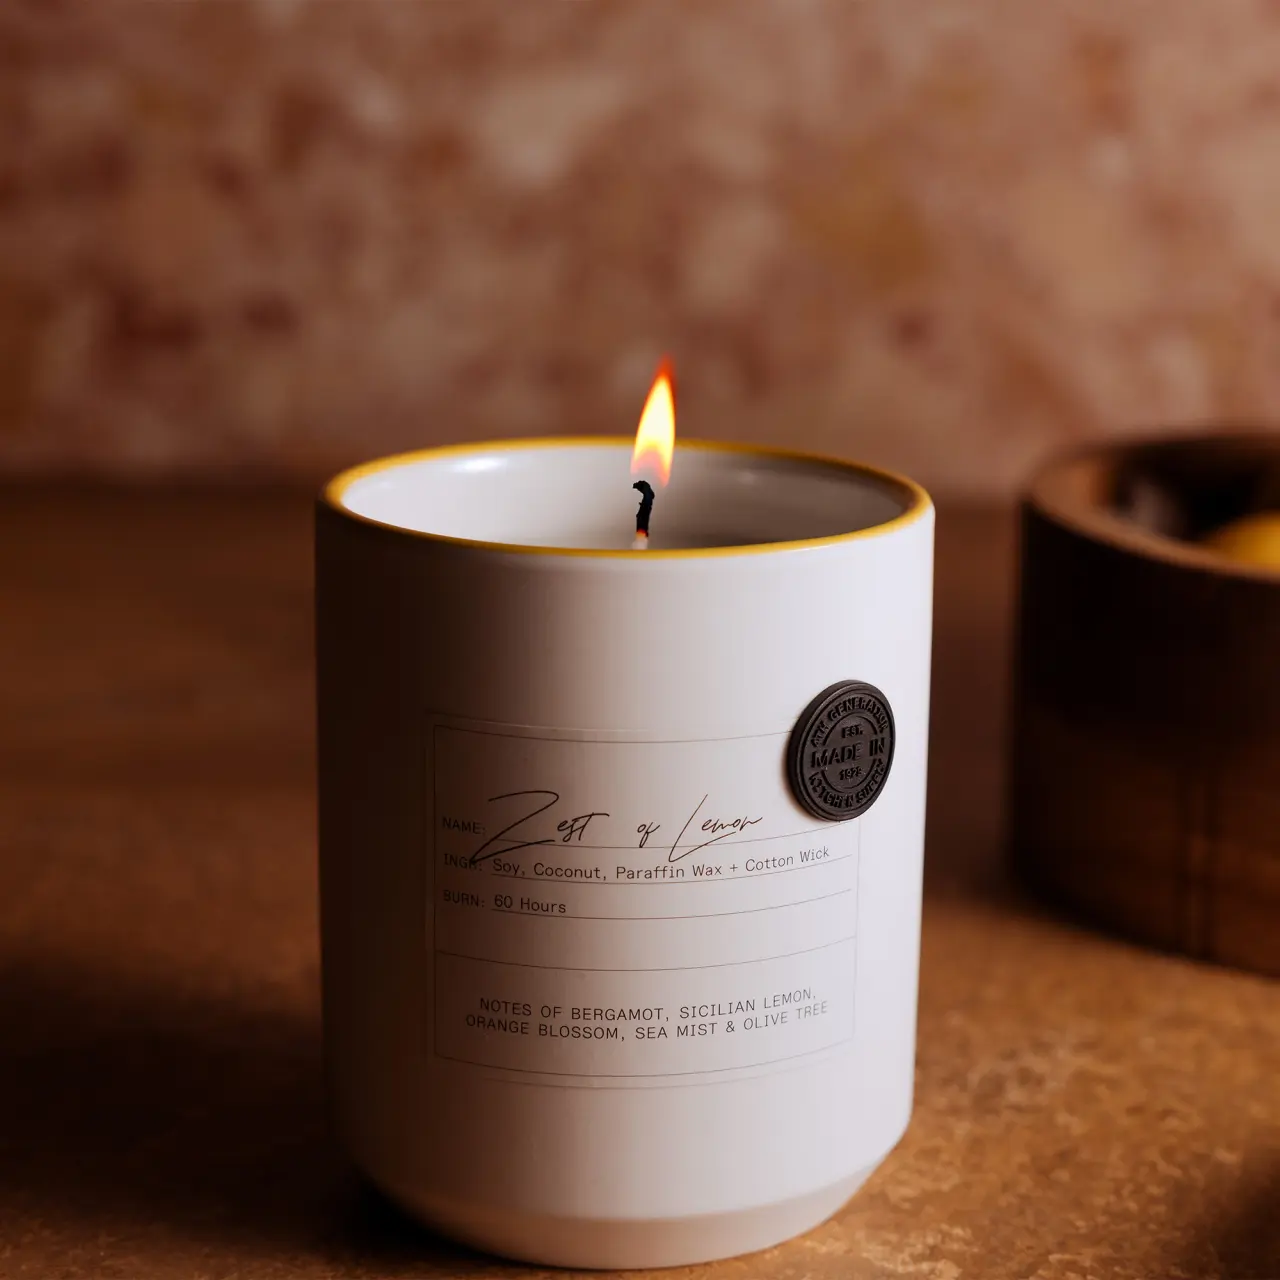 A lit scented candle with a visible label stands on a table, providing a warm ambiance.